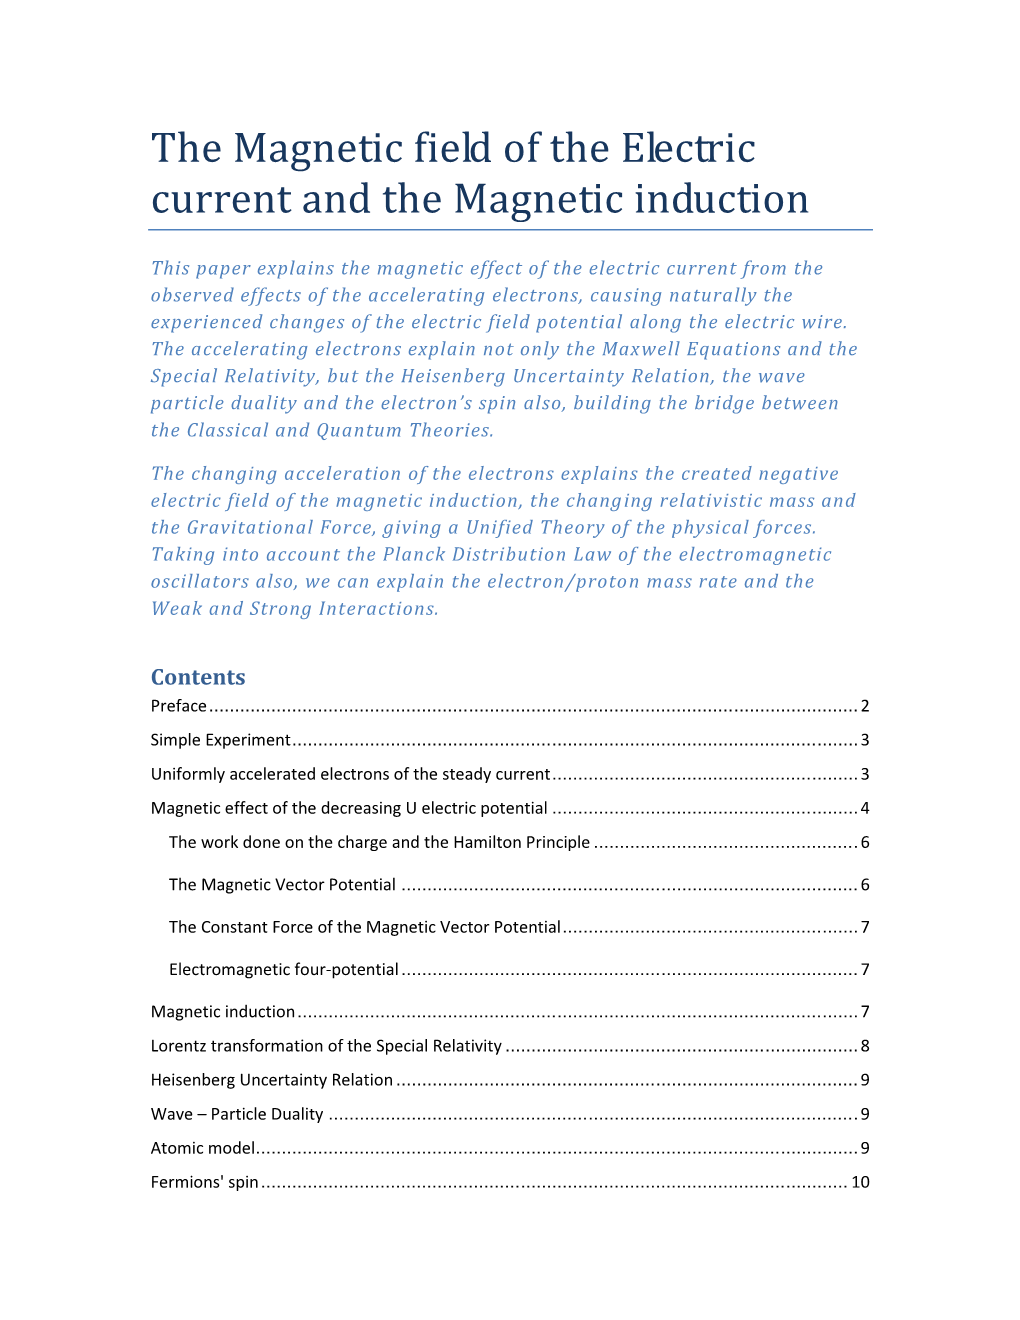 The Magnetic Field of the Electric Current and the Magnetic Induction